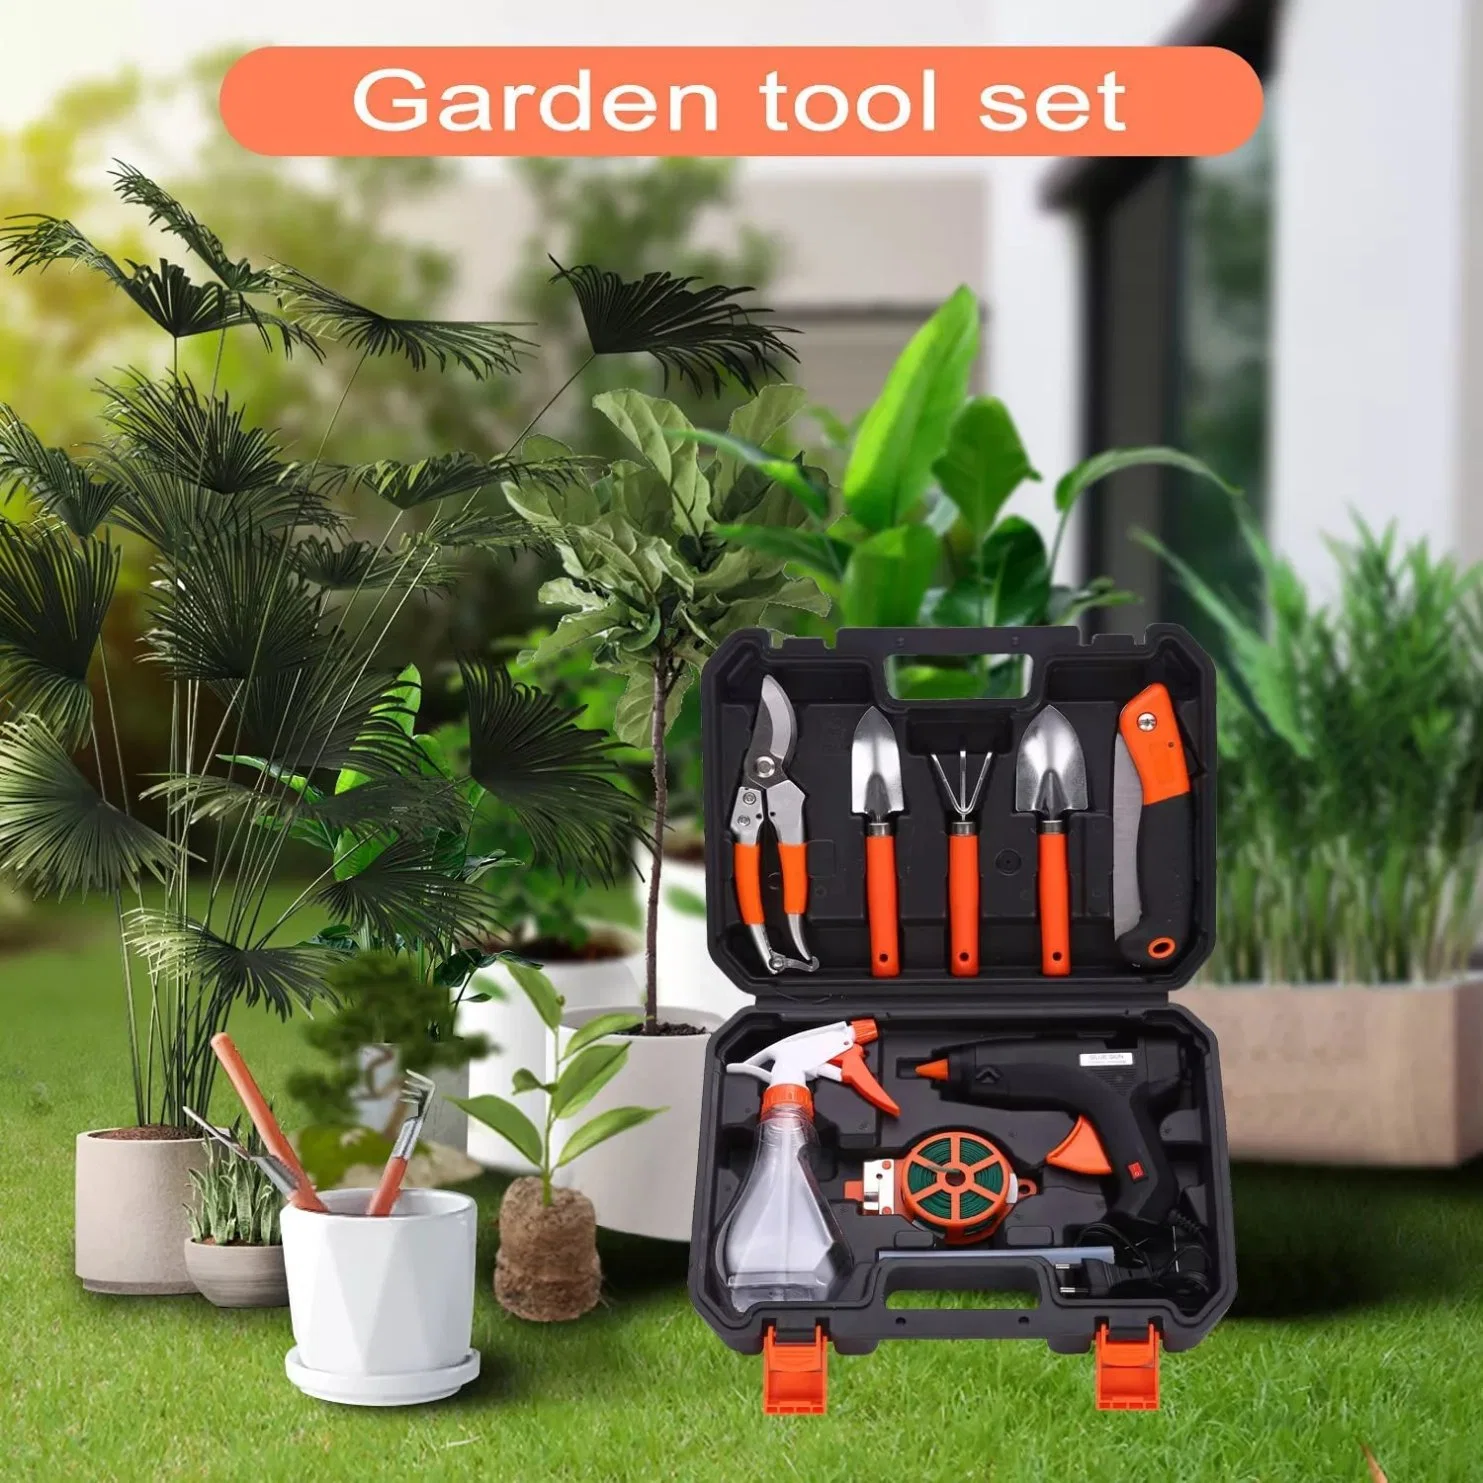 10 PCS Hot Sale Orange Mini Garden Hand Tools Professional and Portable Electric Gardening Tool Set with Carrying Case